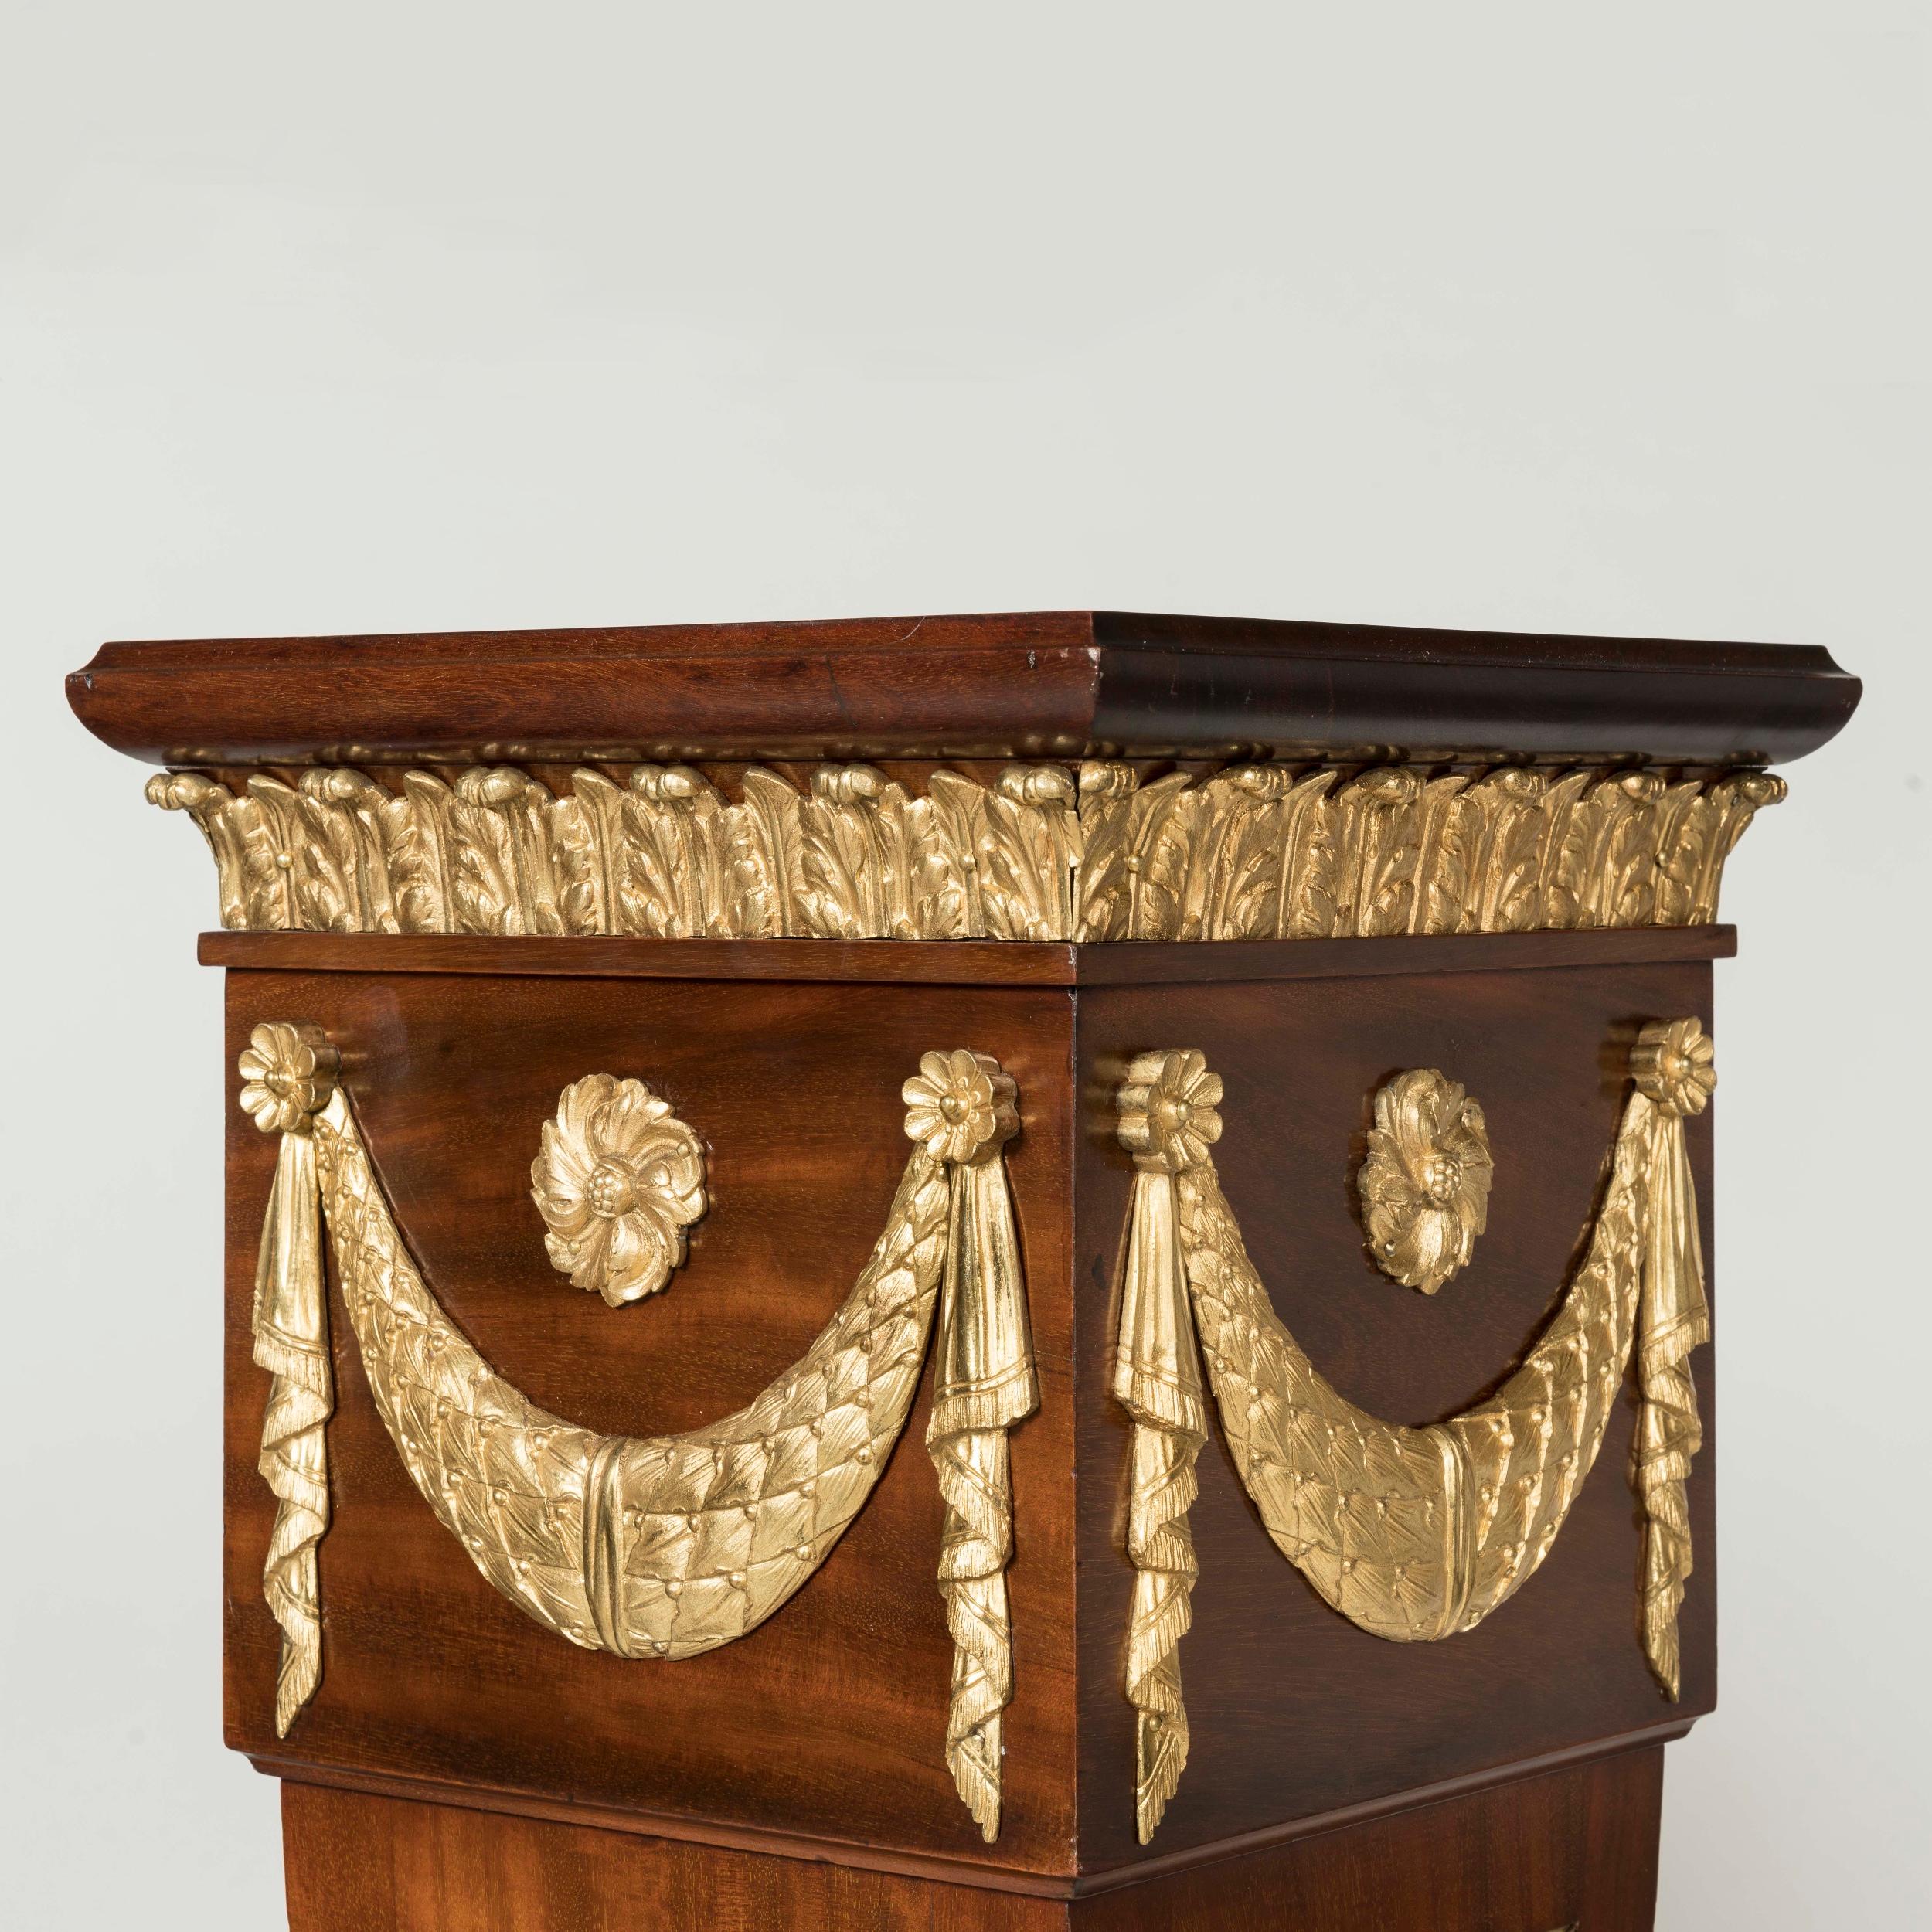 19th Century Pair of English Ormolu-Mounted Mahogany Pedestals by Trollope For Sale 1